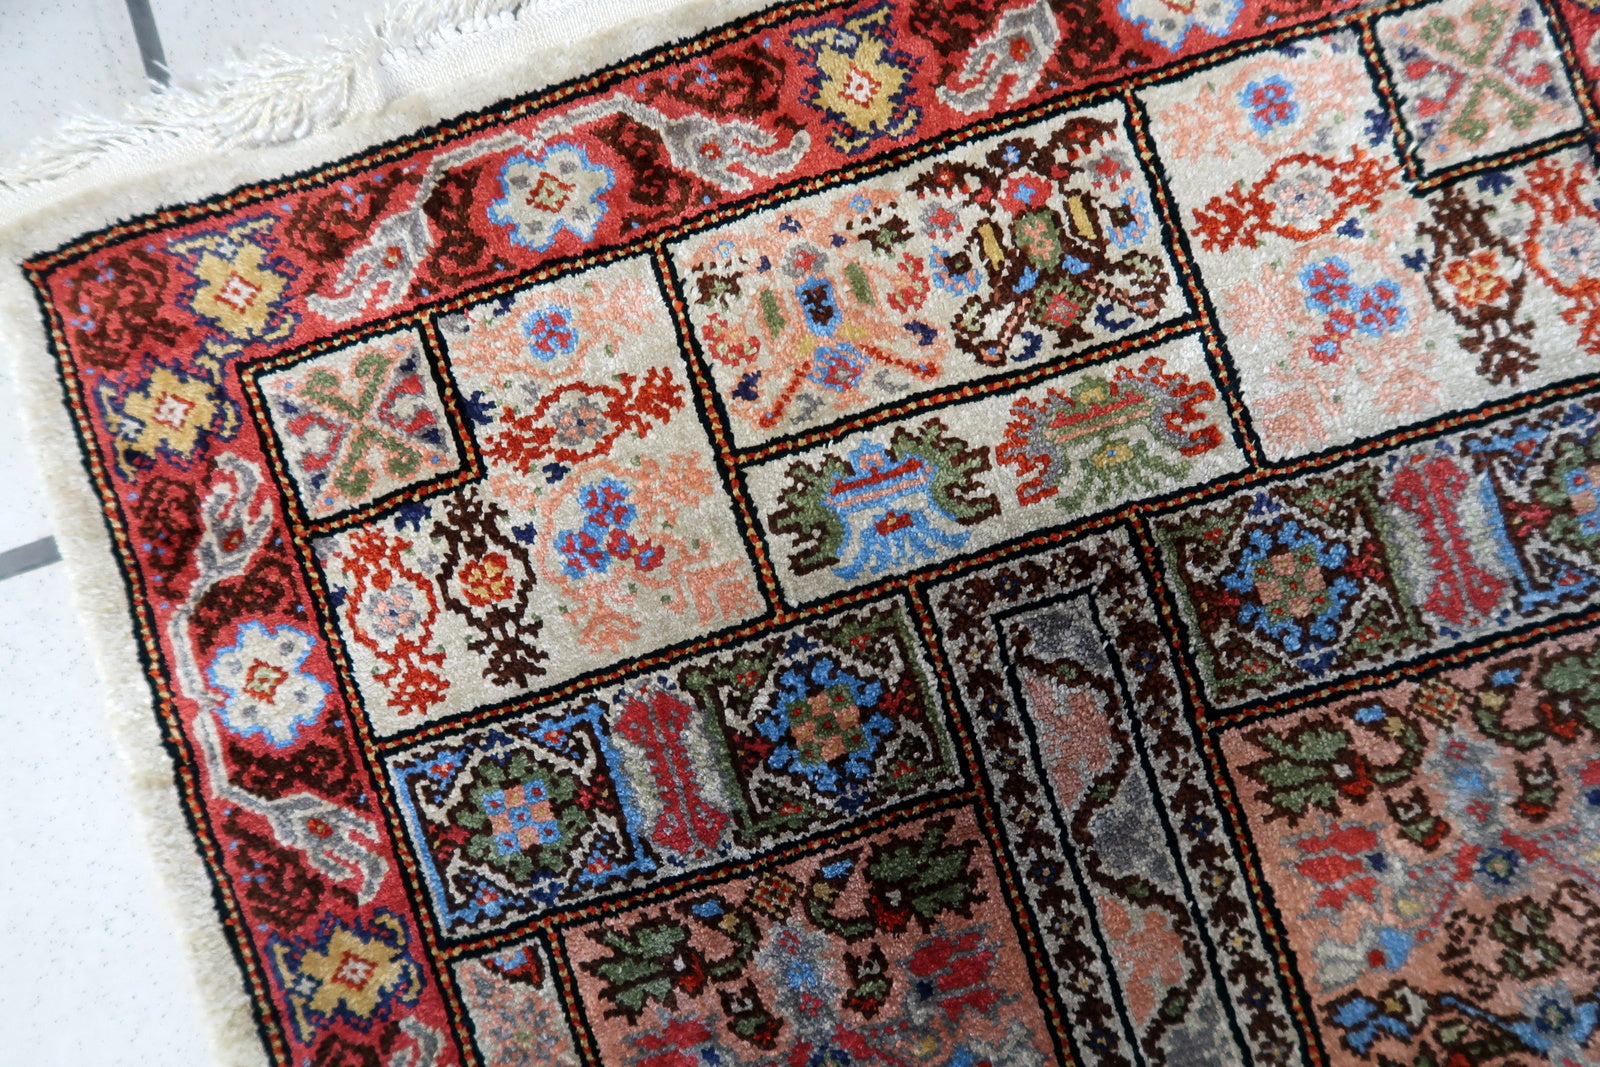 Close-up of the intricate floral motifs and geometric shapes on the Tunisian silk rug